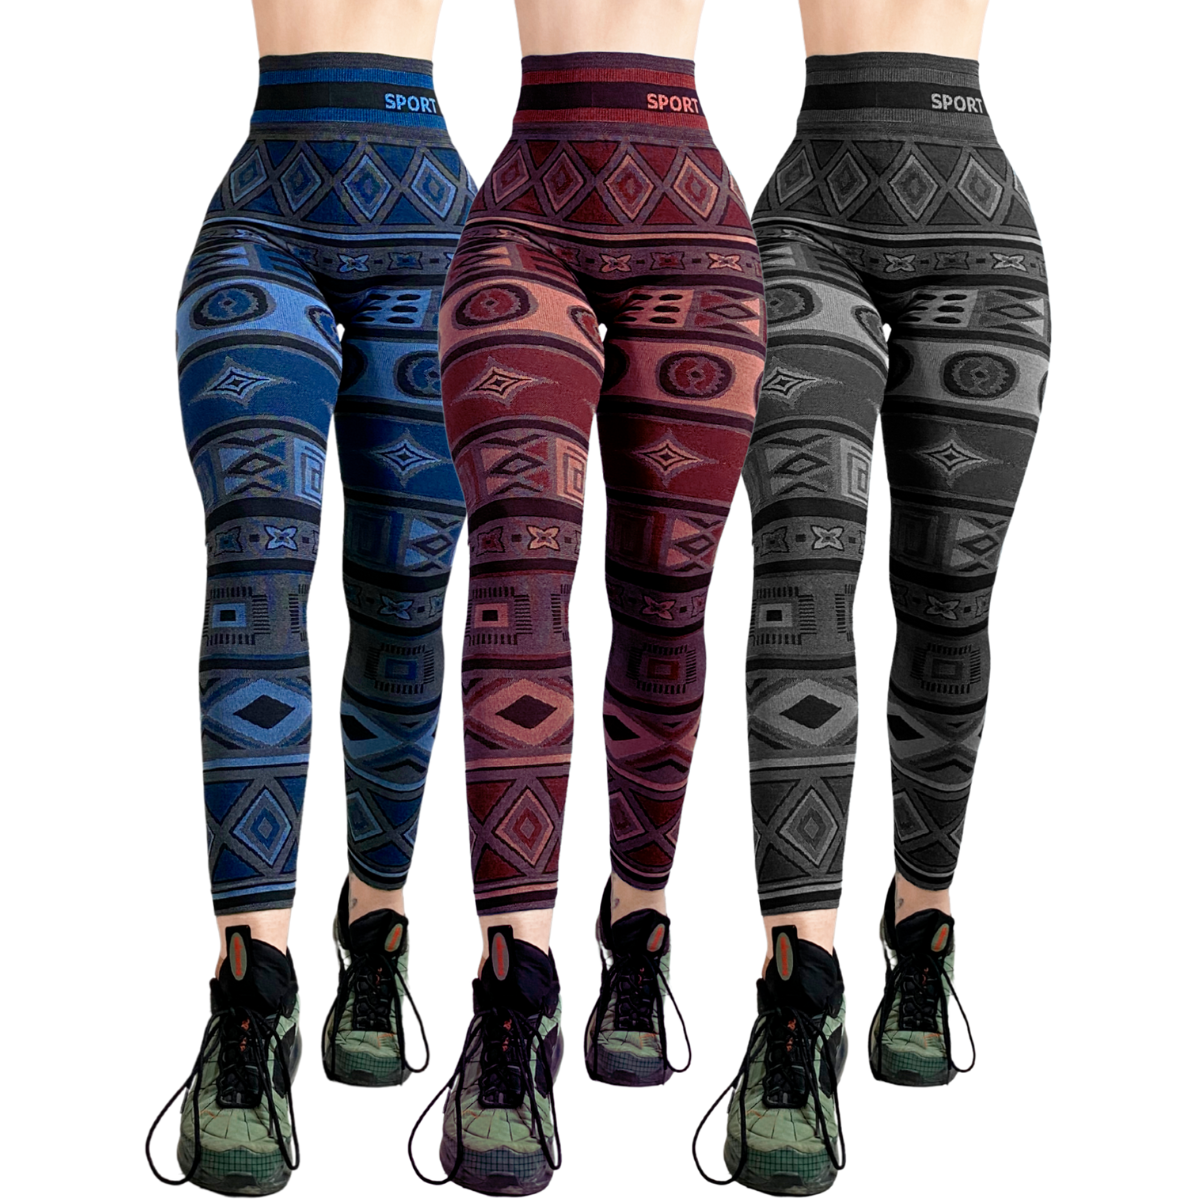 Pack 3 Mallas Lycra Leggins Mujer Gym Casual Mayon Talle alto